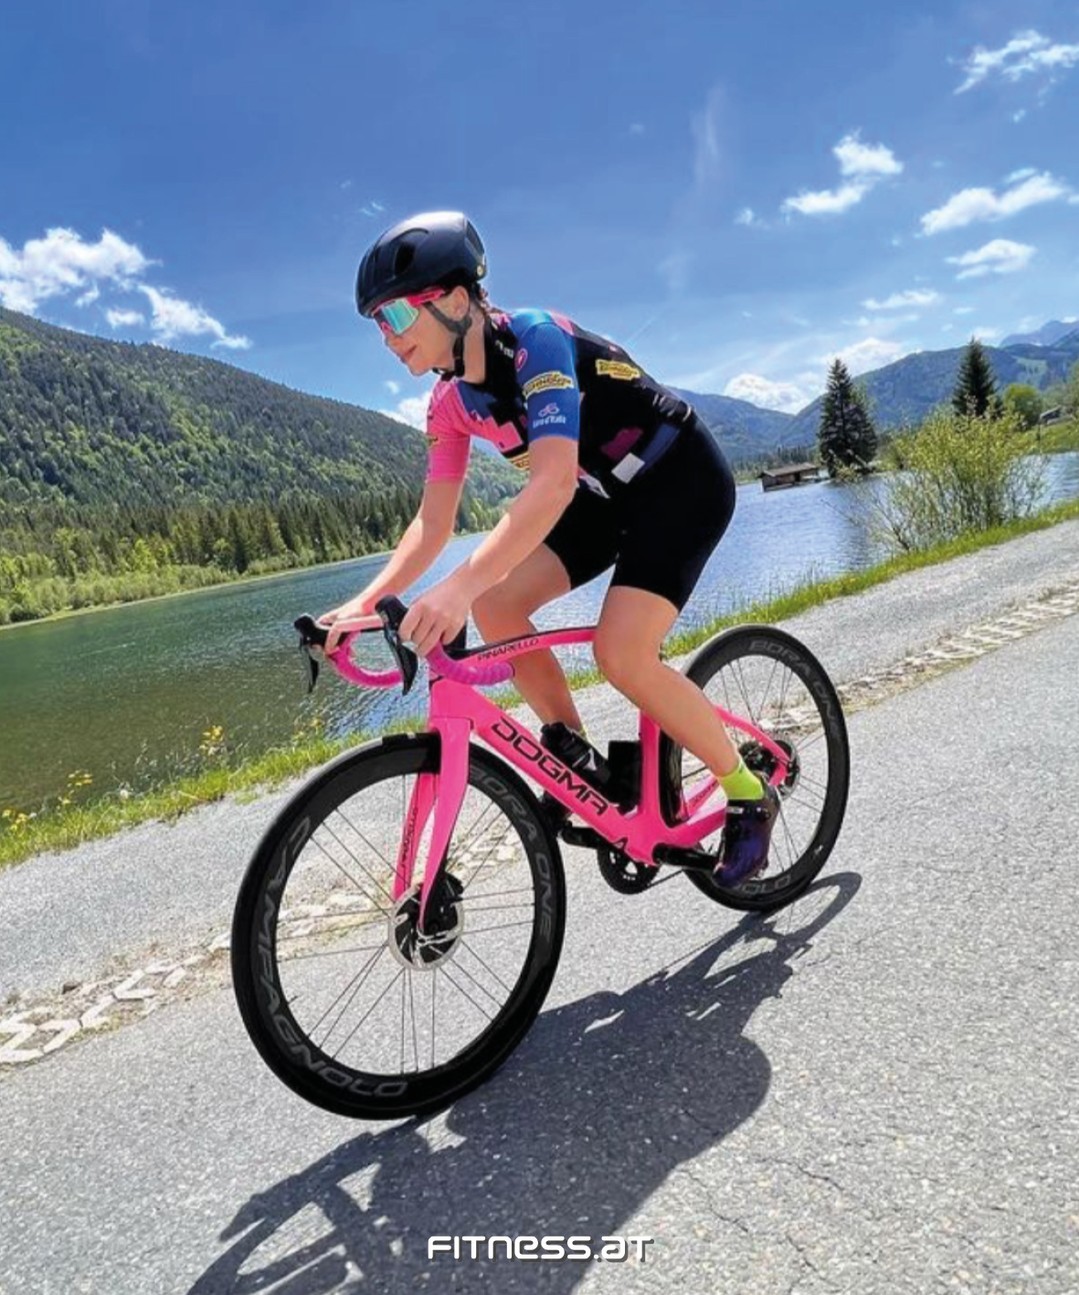 I’m doing this for me 🚴‍♀️✨

📷 @katka_wurpes
📍 Pillersee

#fitnessat #weilwirfitnessleben #fitnesscompanygroup #feelit #outdoor #fun #feelfree #bike #motivation #sport #fitness #stayfit #feelgood #youcan #bestrong #strong #bandofcyclists #technogymaustria #girlsonbikes #cyclingbeauties #cycling #cyclinglife #cyclingphotos #salzburgerland #pillersee